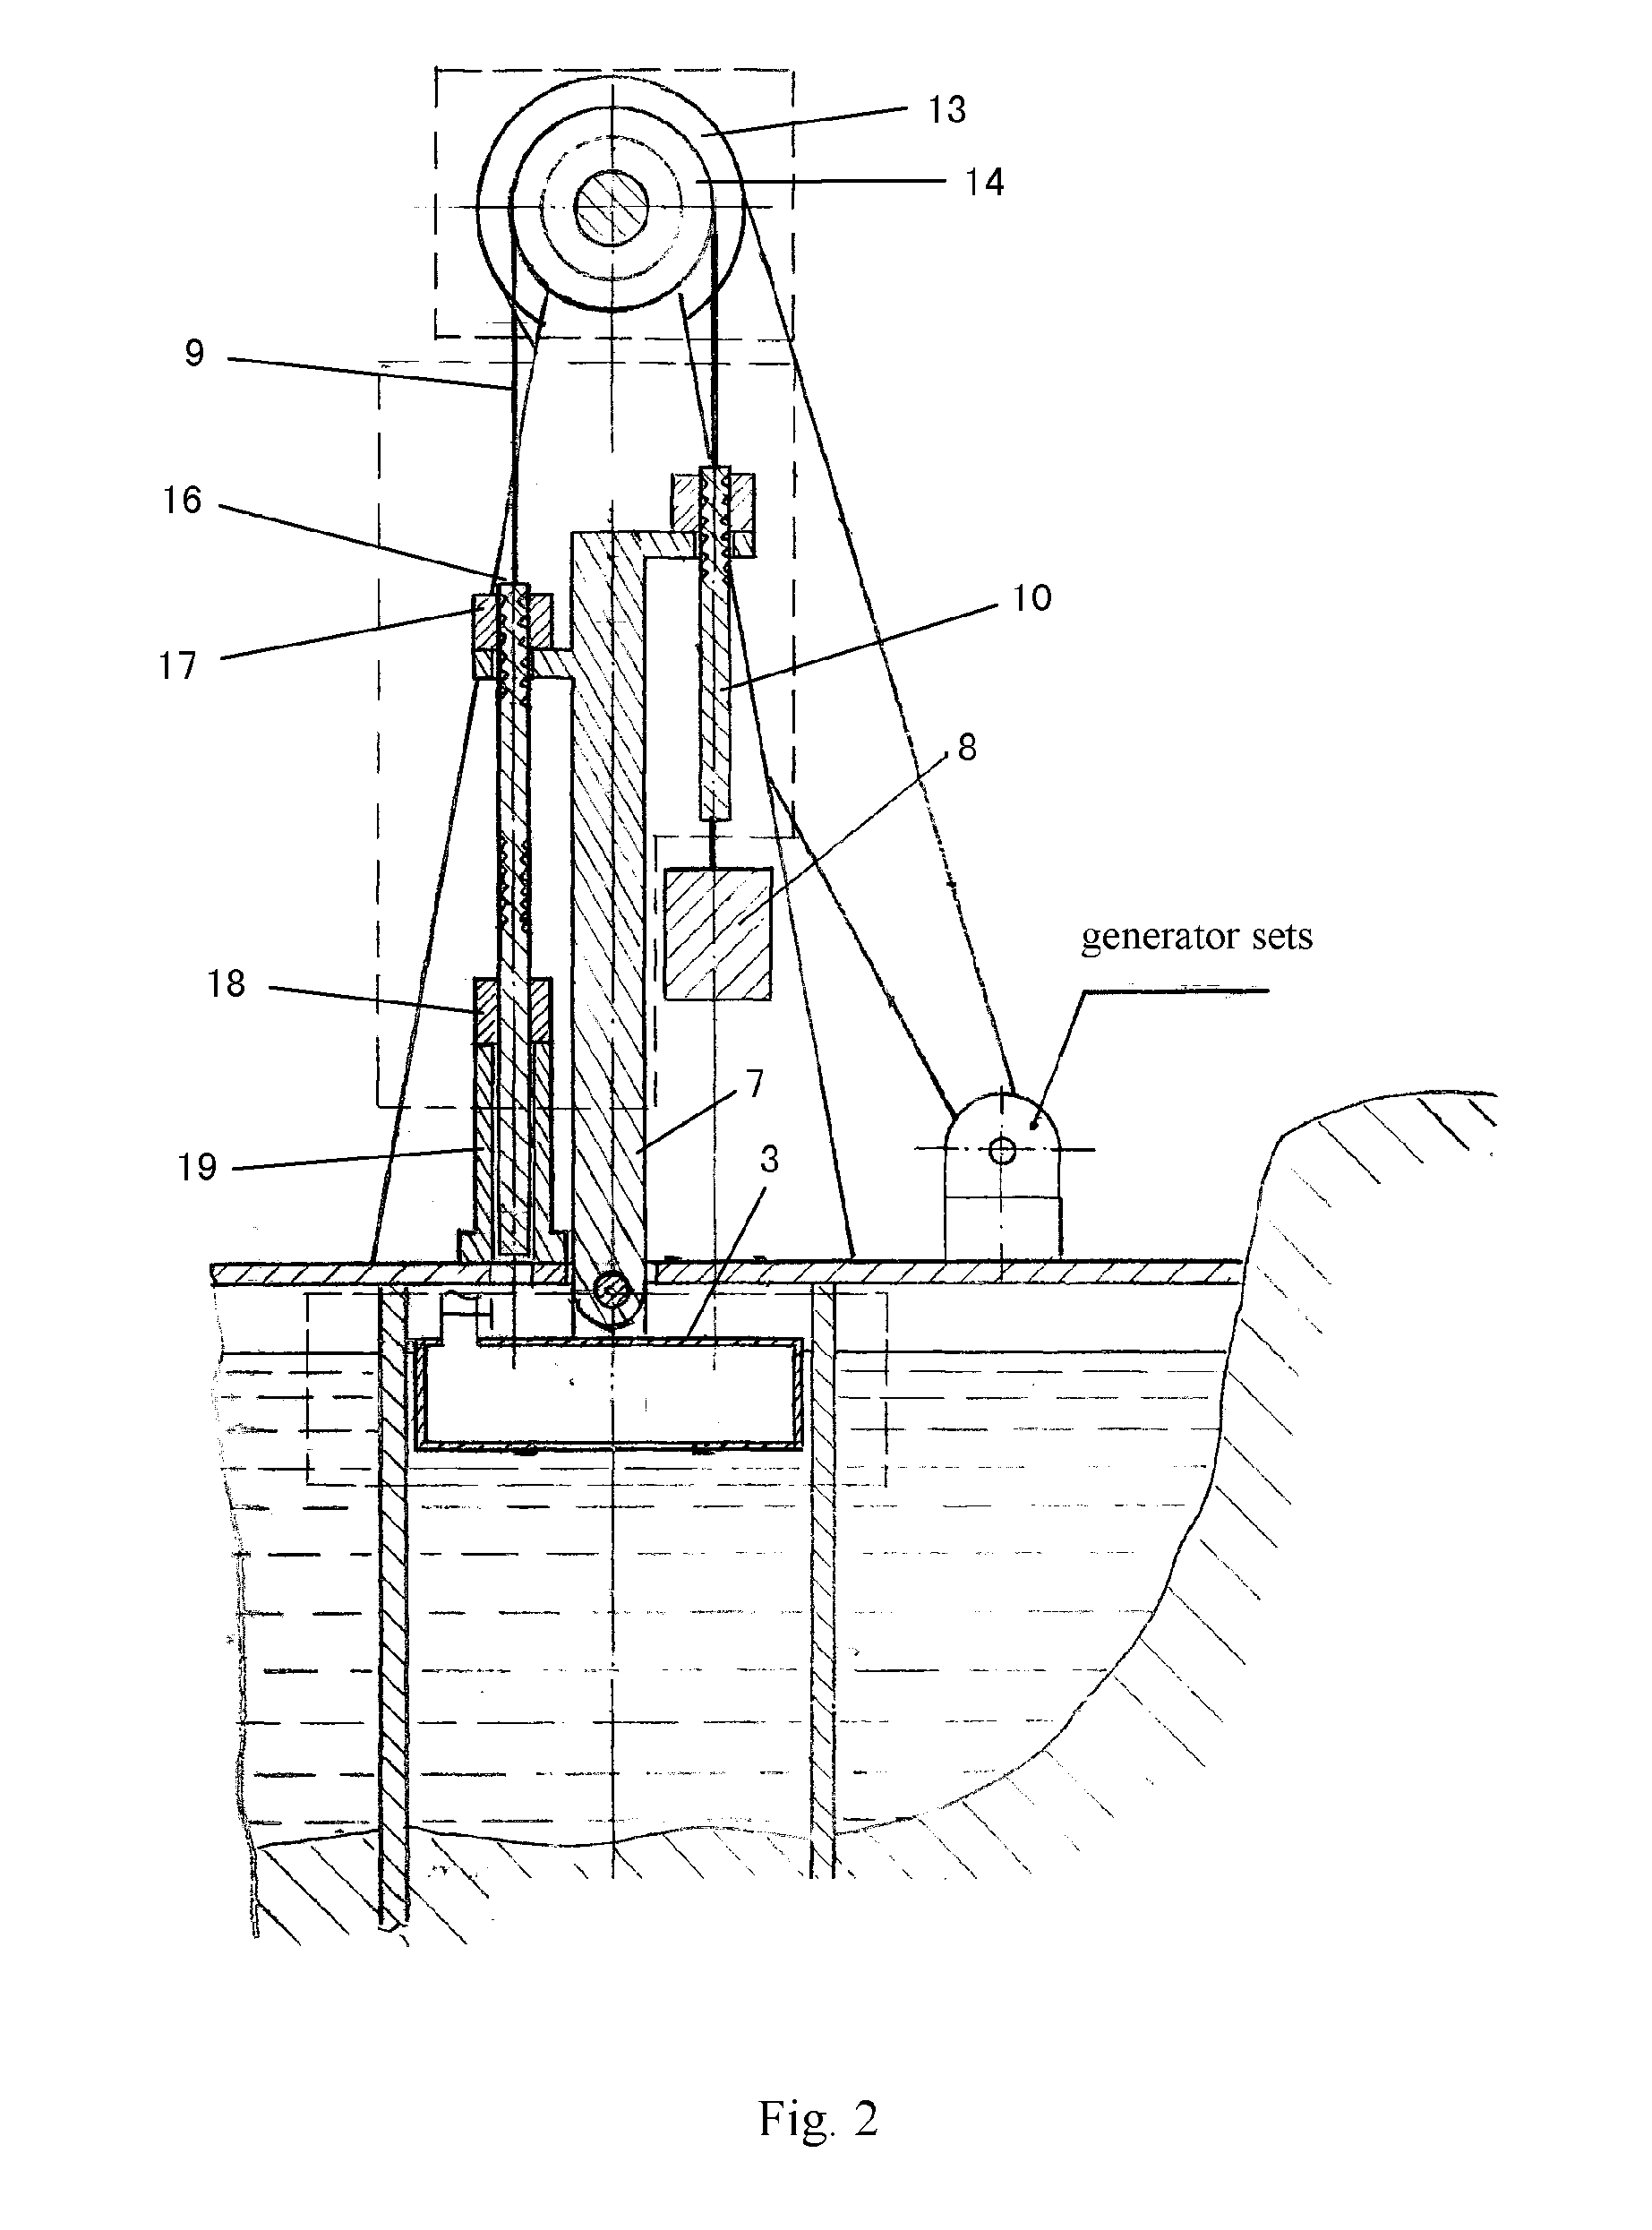 Method And System For Tidal Energy Storage And Power Generation